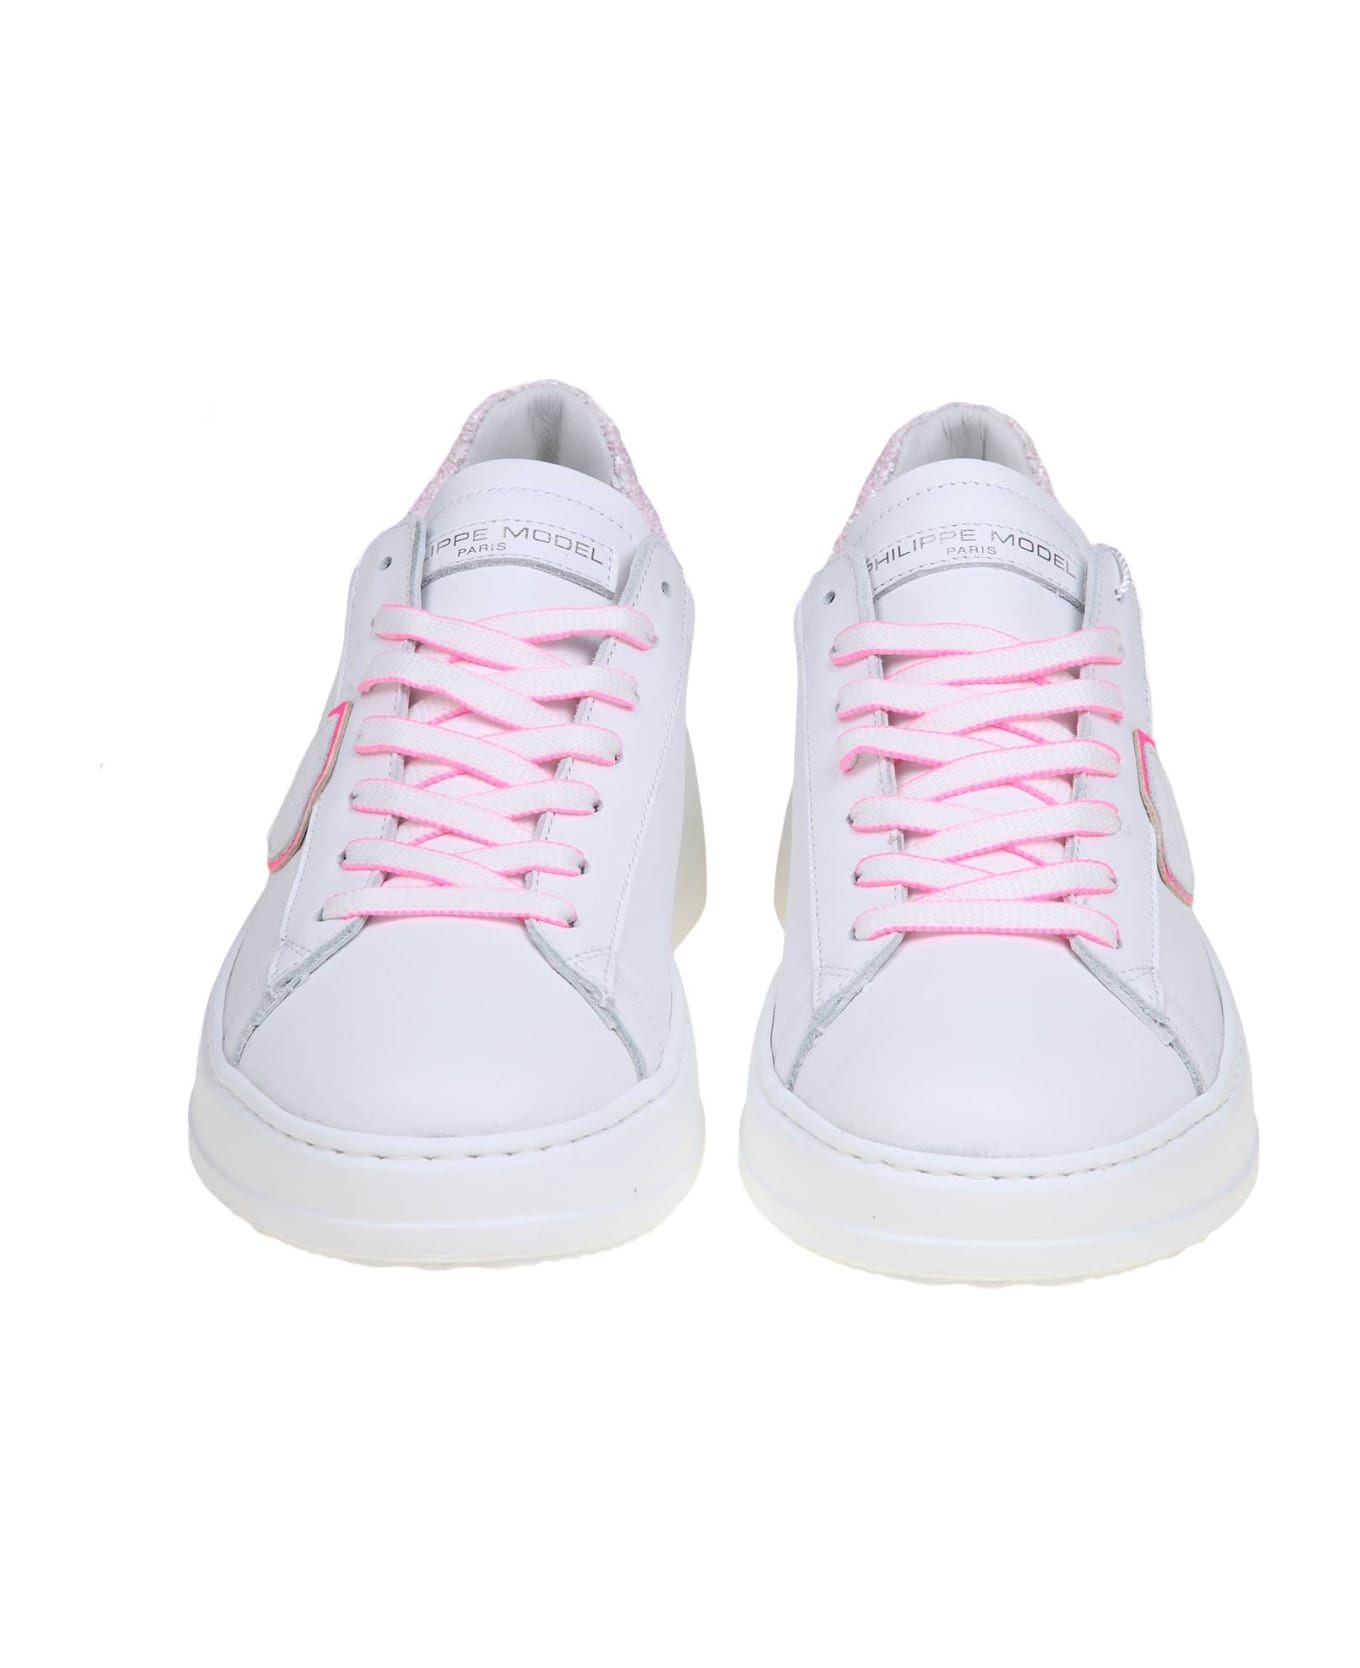 Philippe Model Tres Temple Low In White And Fuchsia Leather - Blanc/fucsia